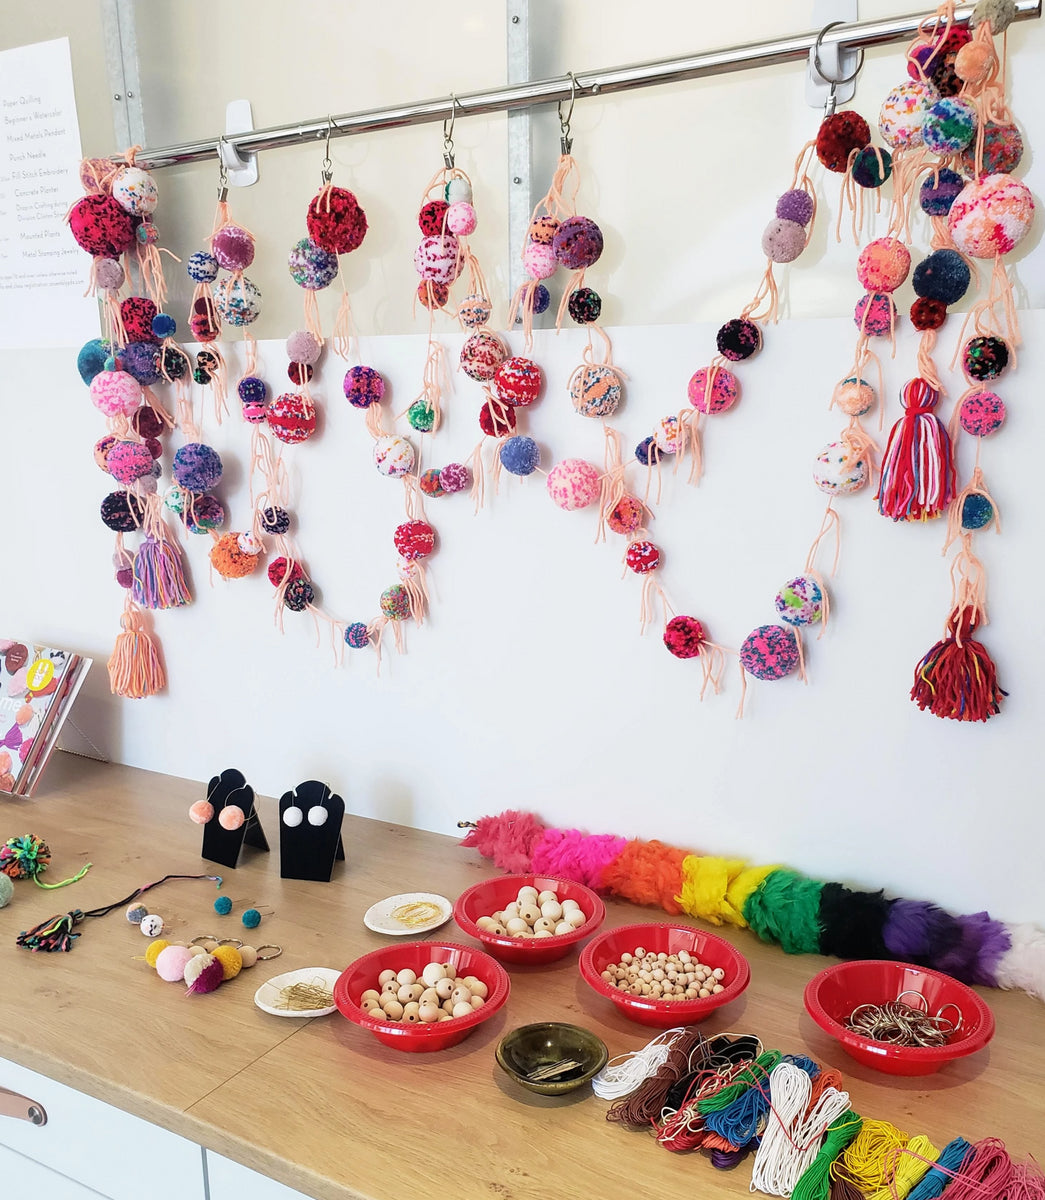 The Pom-Pom Making Workshop is this Saturday! 10 a.m. at the South